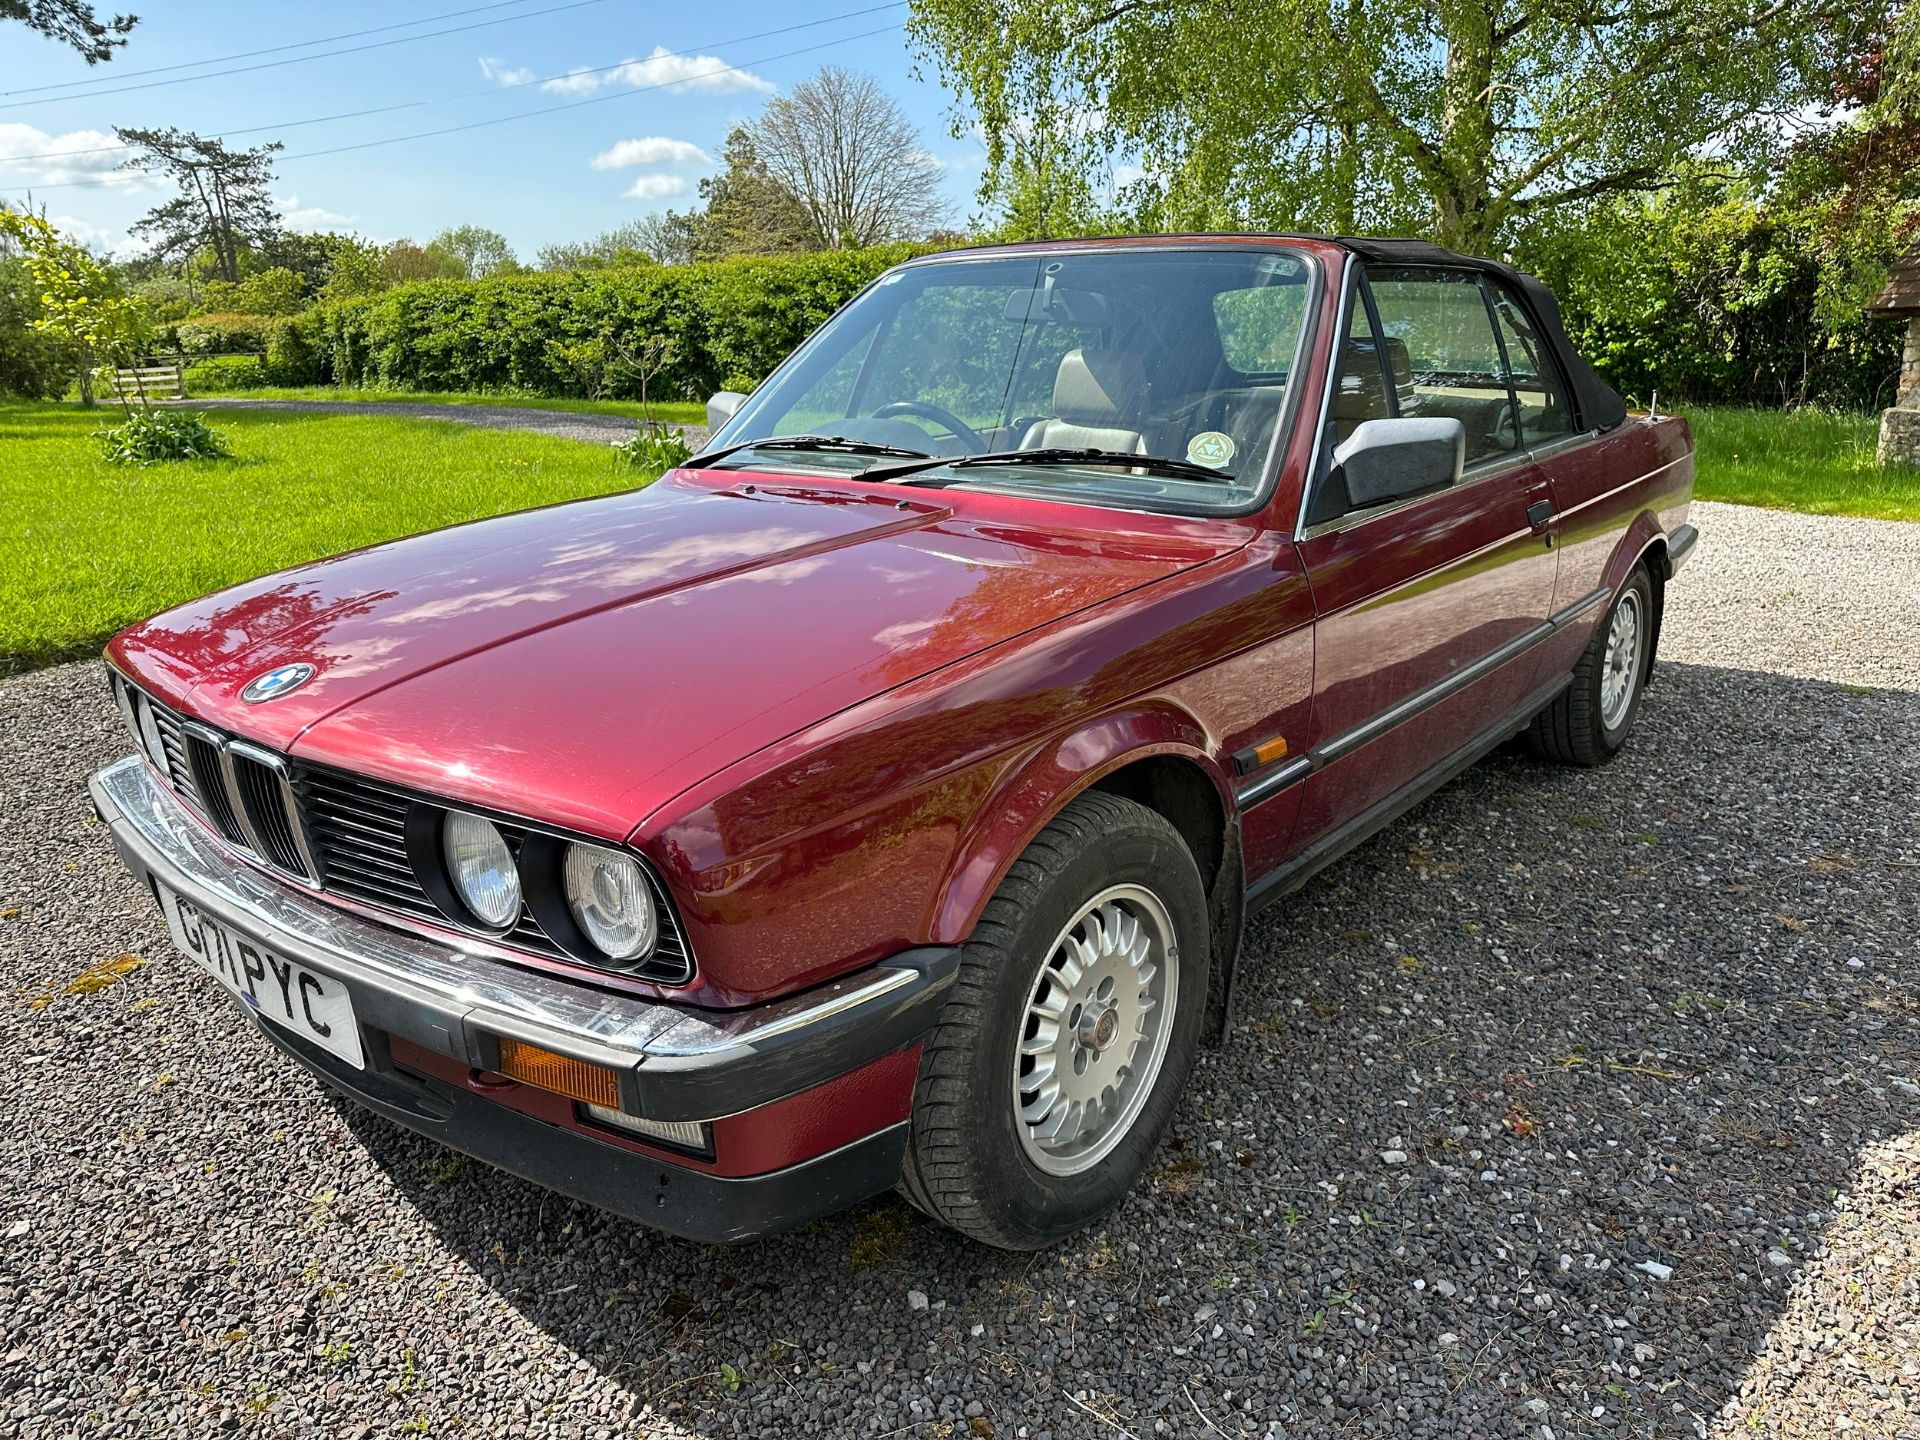 1990 BMW 325i Convertible Registration number G171 PYC Chassis number WBABB12070LB95832 Engine - Image 3 of 67